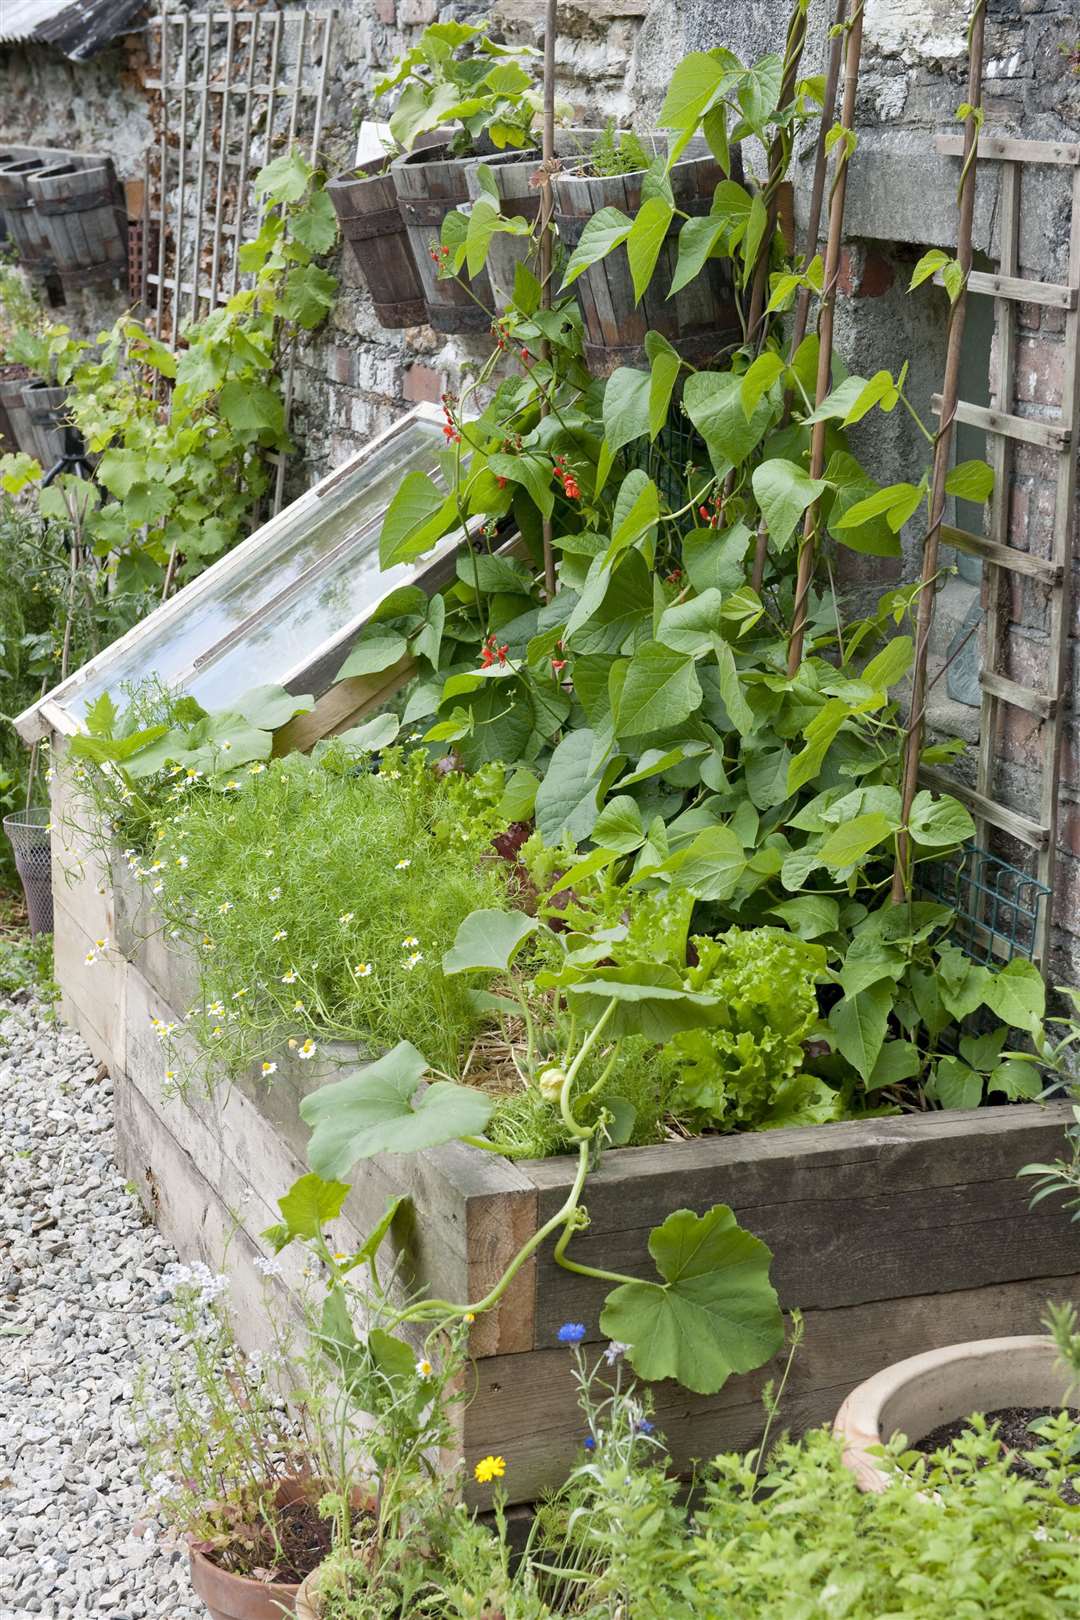 Growing under a cold frame and up a wall can give you an added advantage. Picture: DK Images/PA